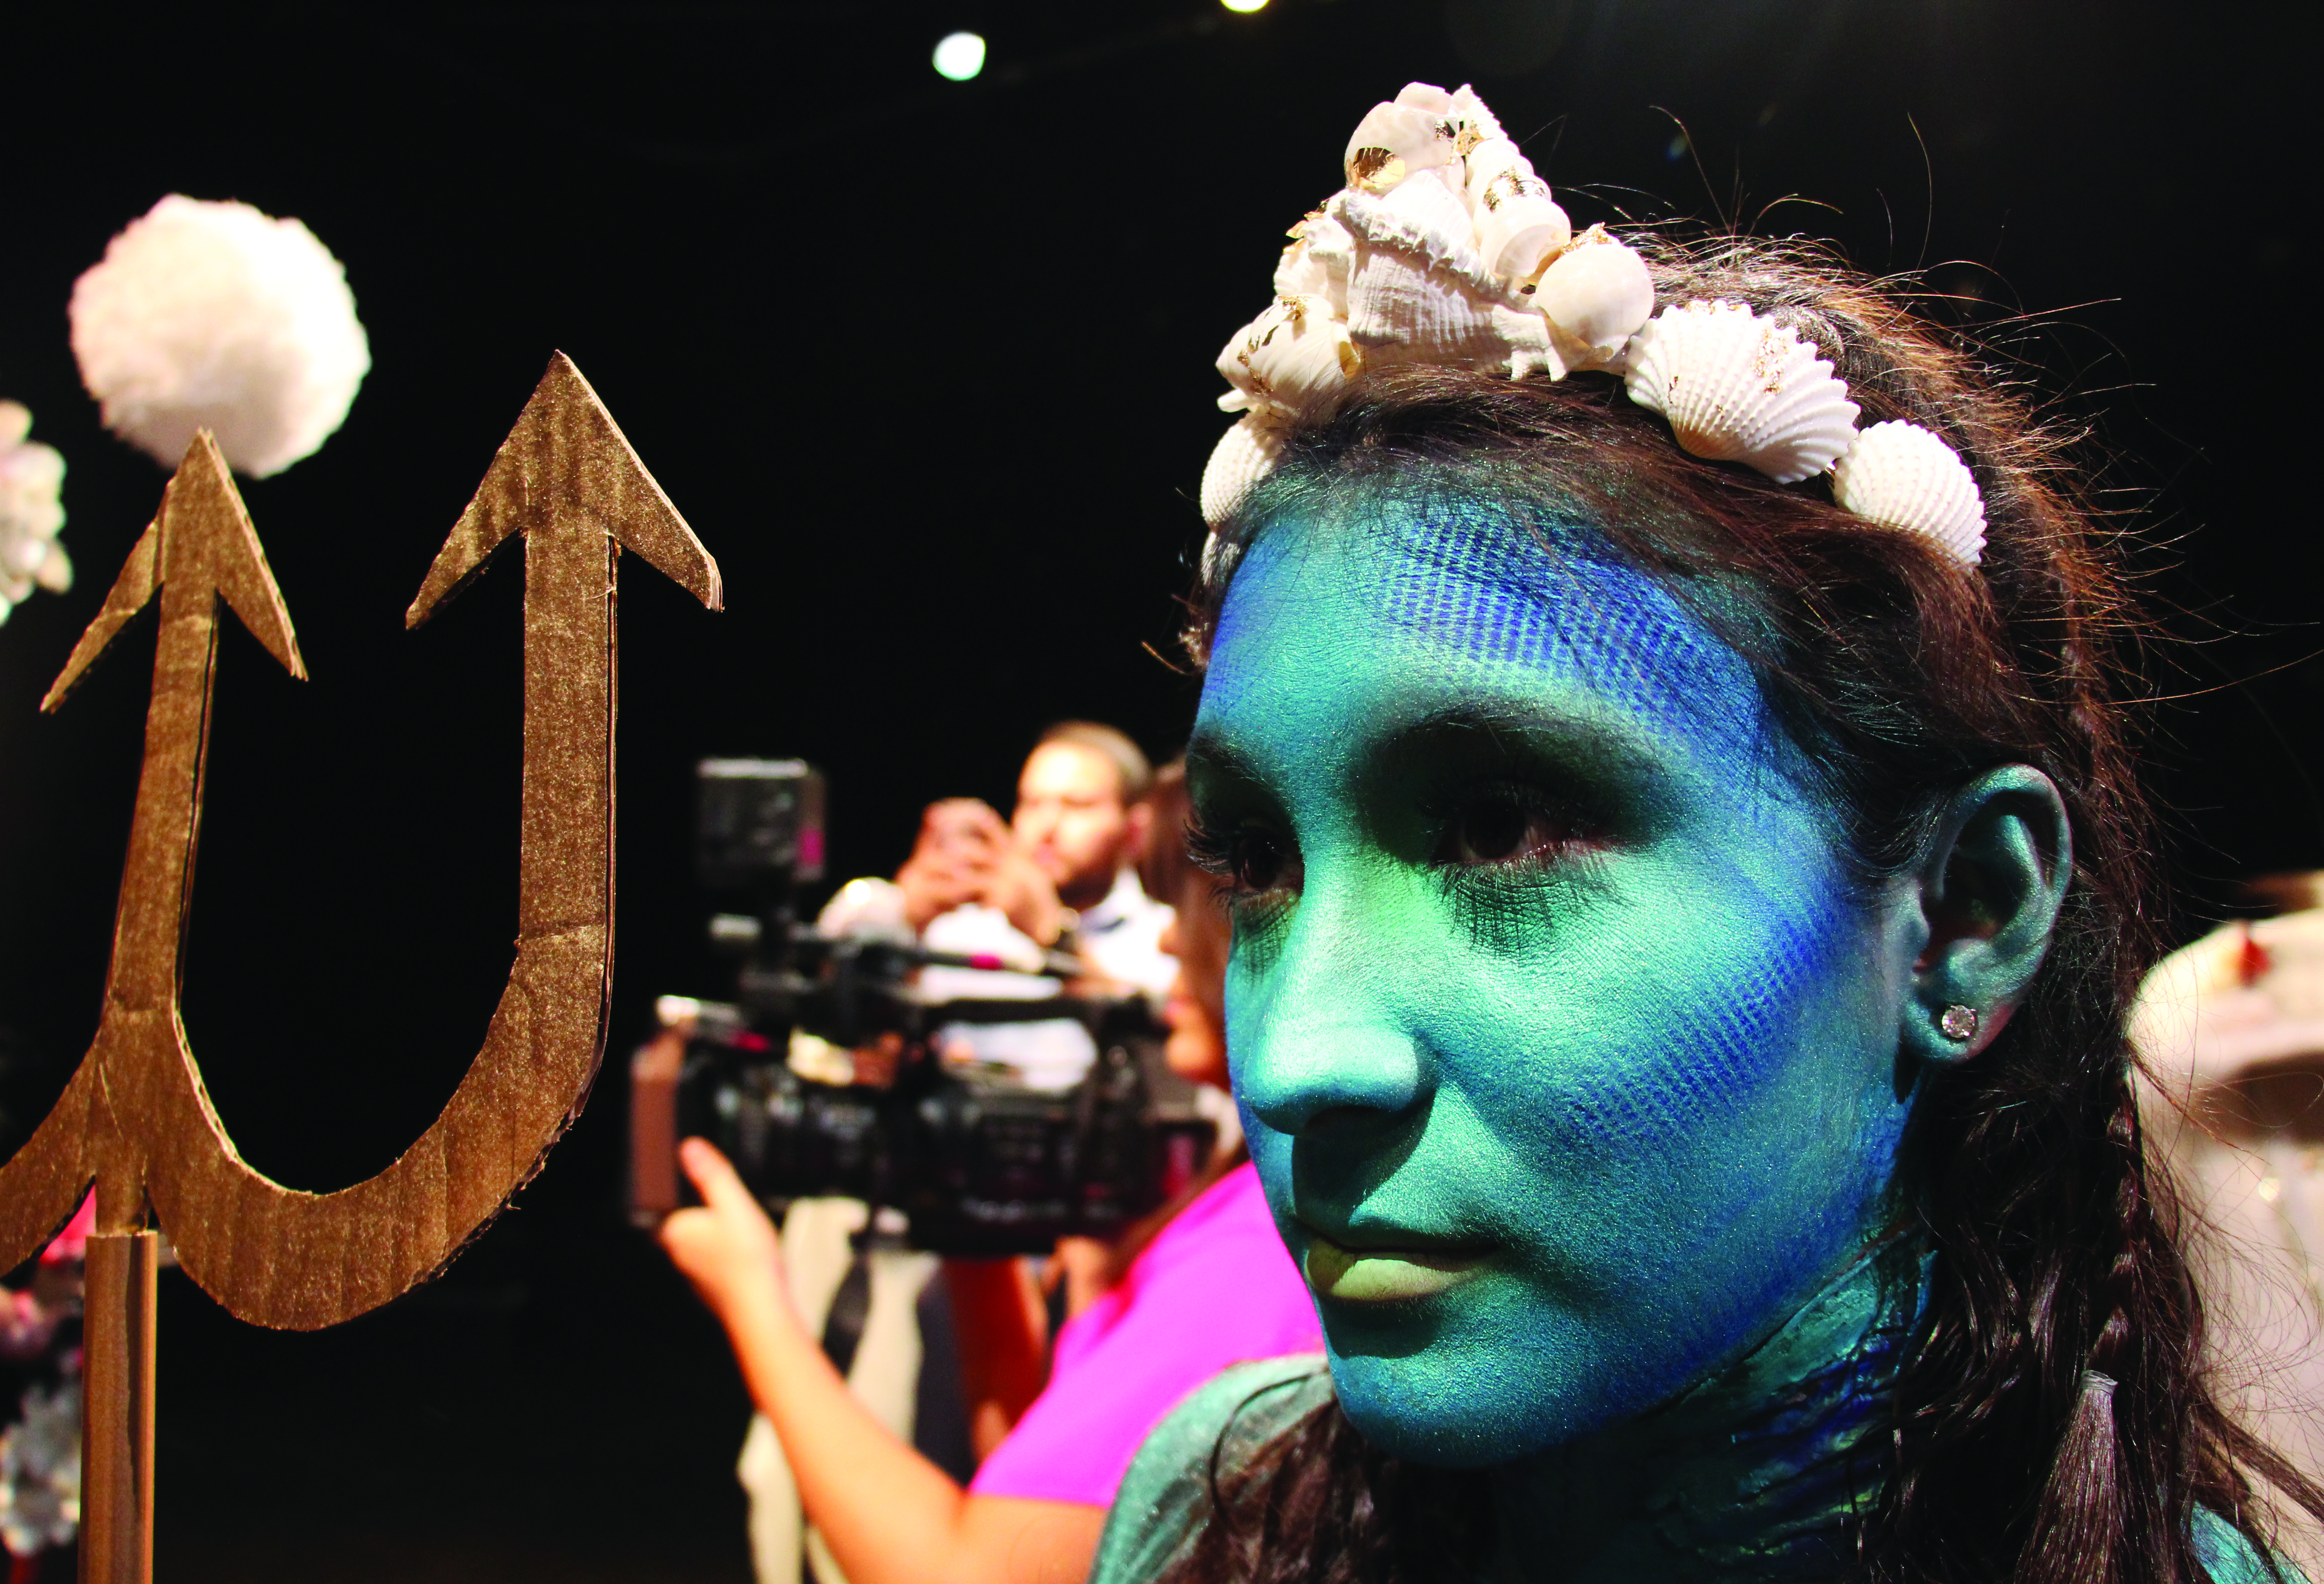 Student makeup wows crowd